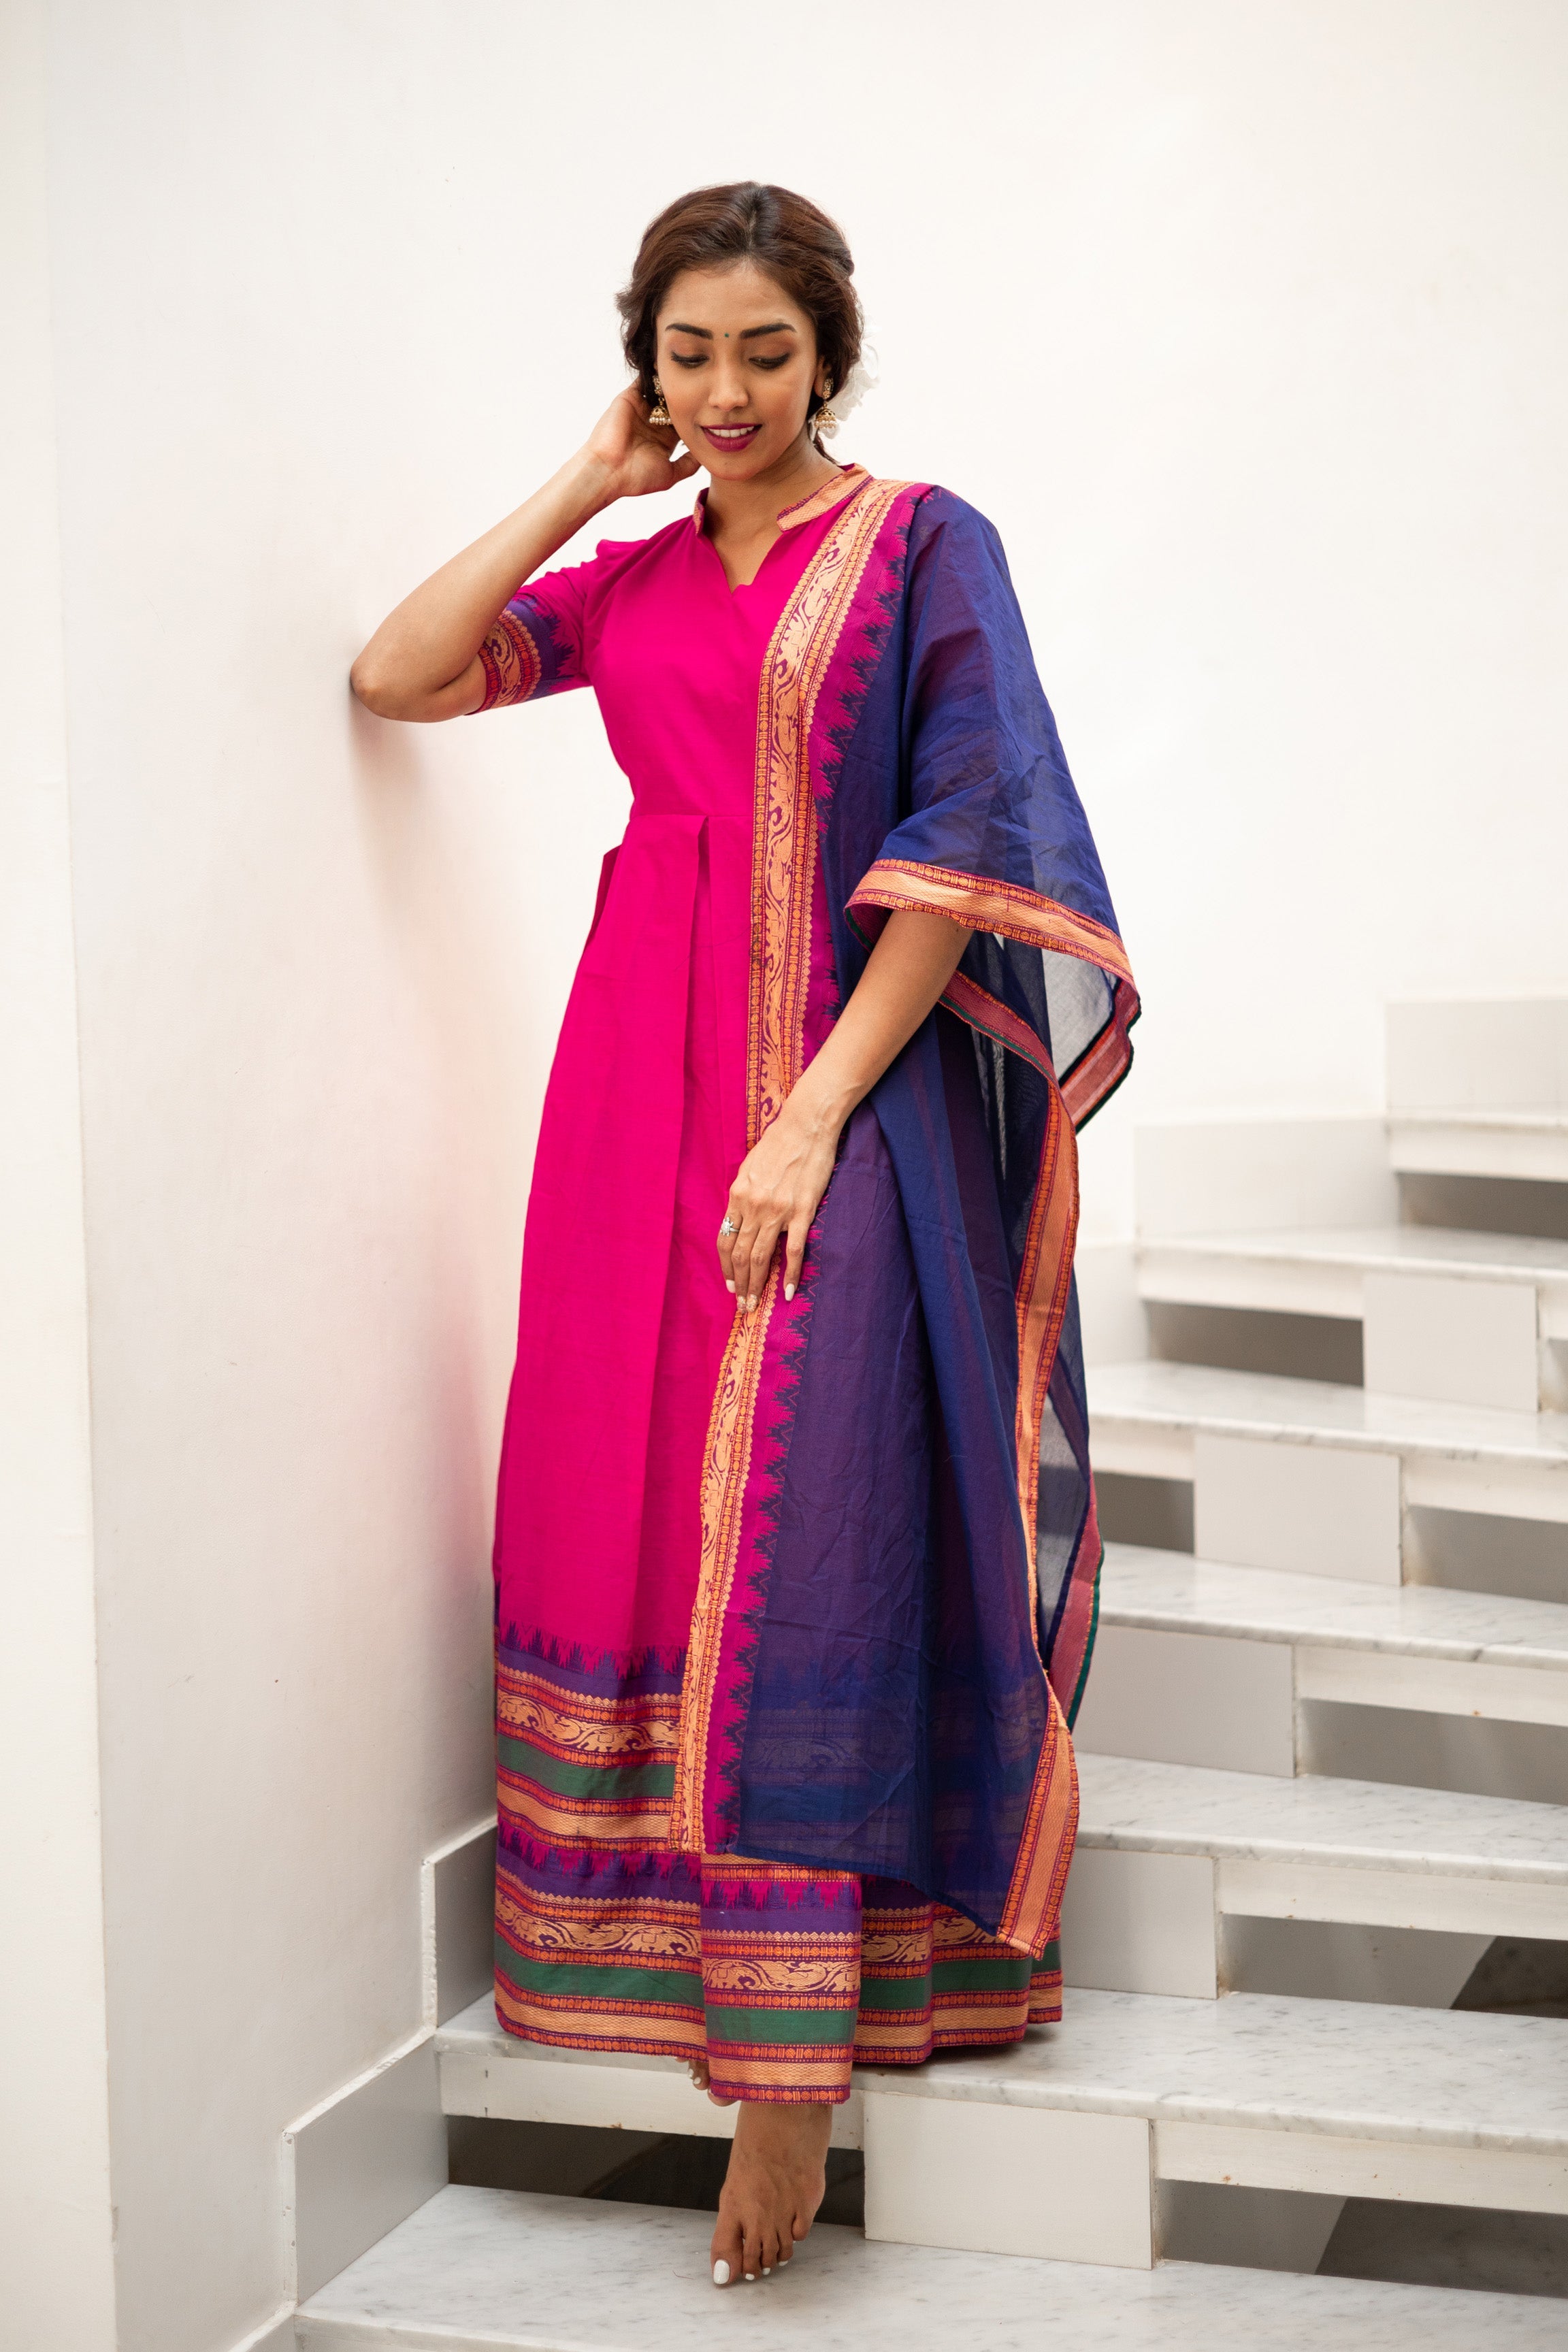 Stand out in style in this traditional hot pink pure cotton maxi dress. Includes dupatta, perfect for any birthday or party. Create the perfect look with this loose and flared maxi dress - perfect for summer.